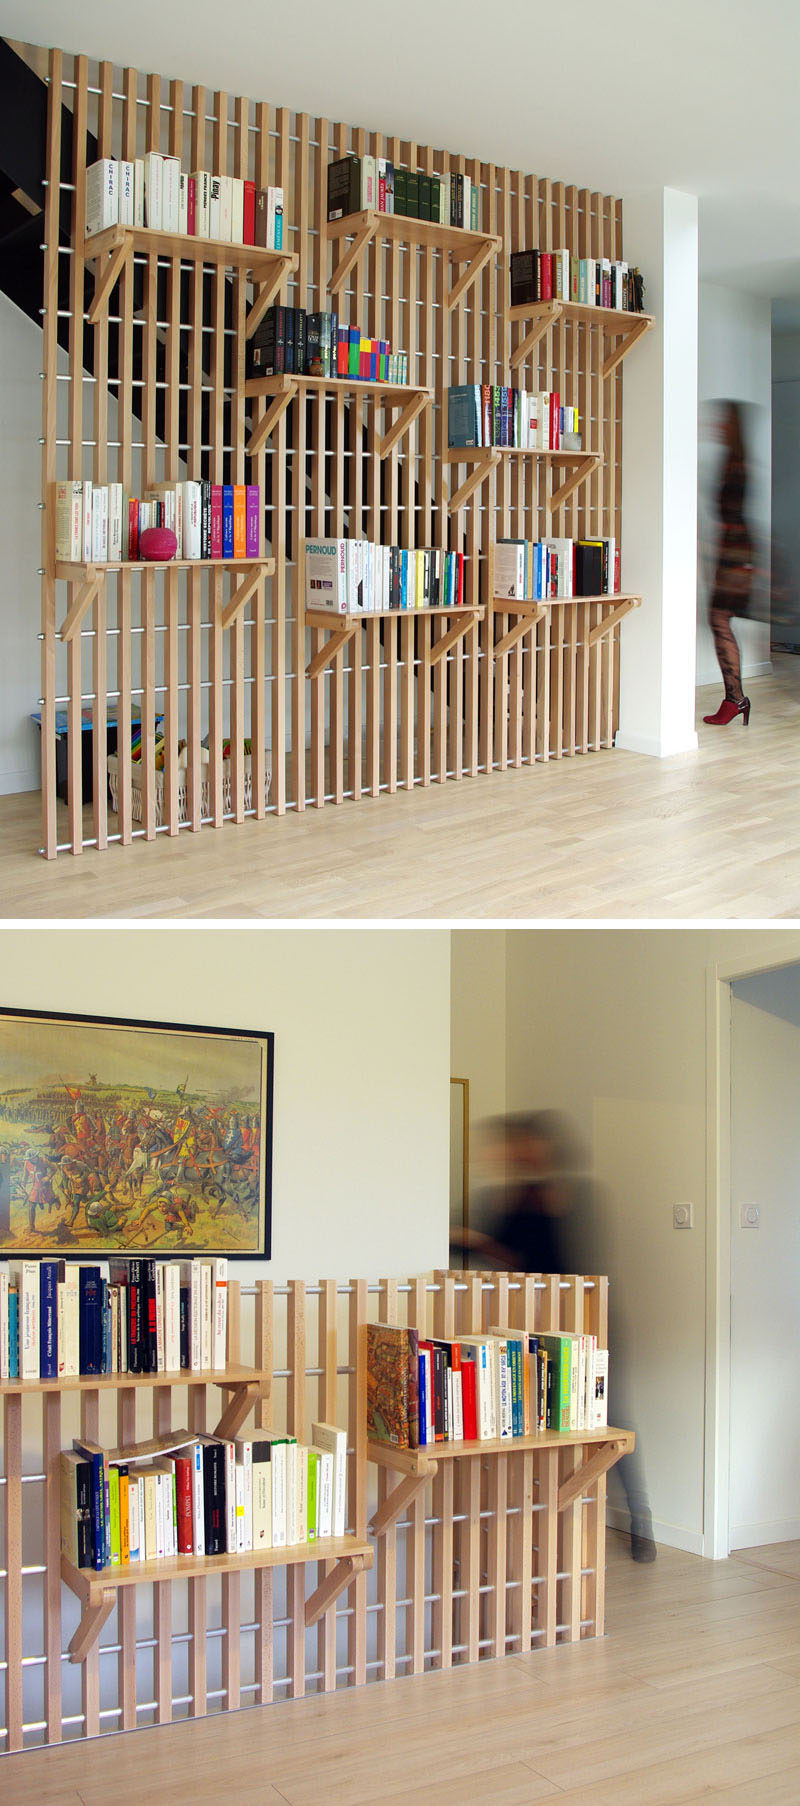 French designer Alexandre Pain created Rossignol, a custom designed wood shelf and railing system that can be used to store books and act as a guard rail for the staircase.